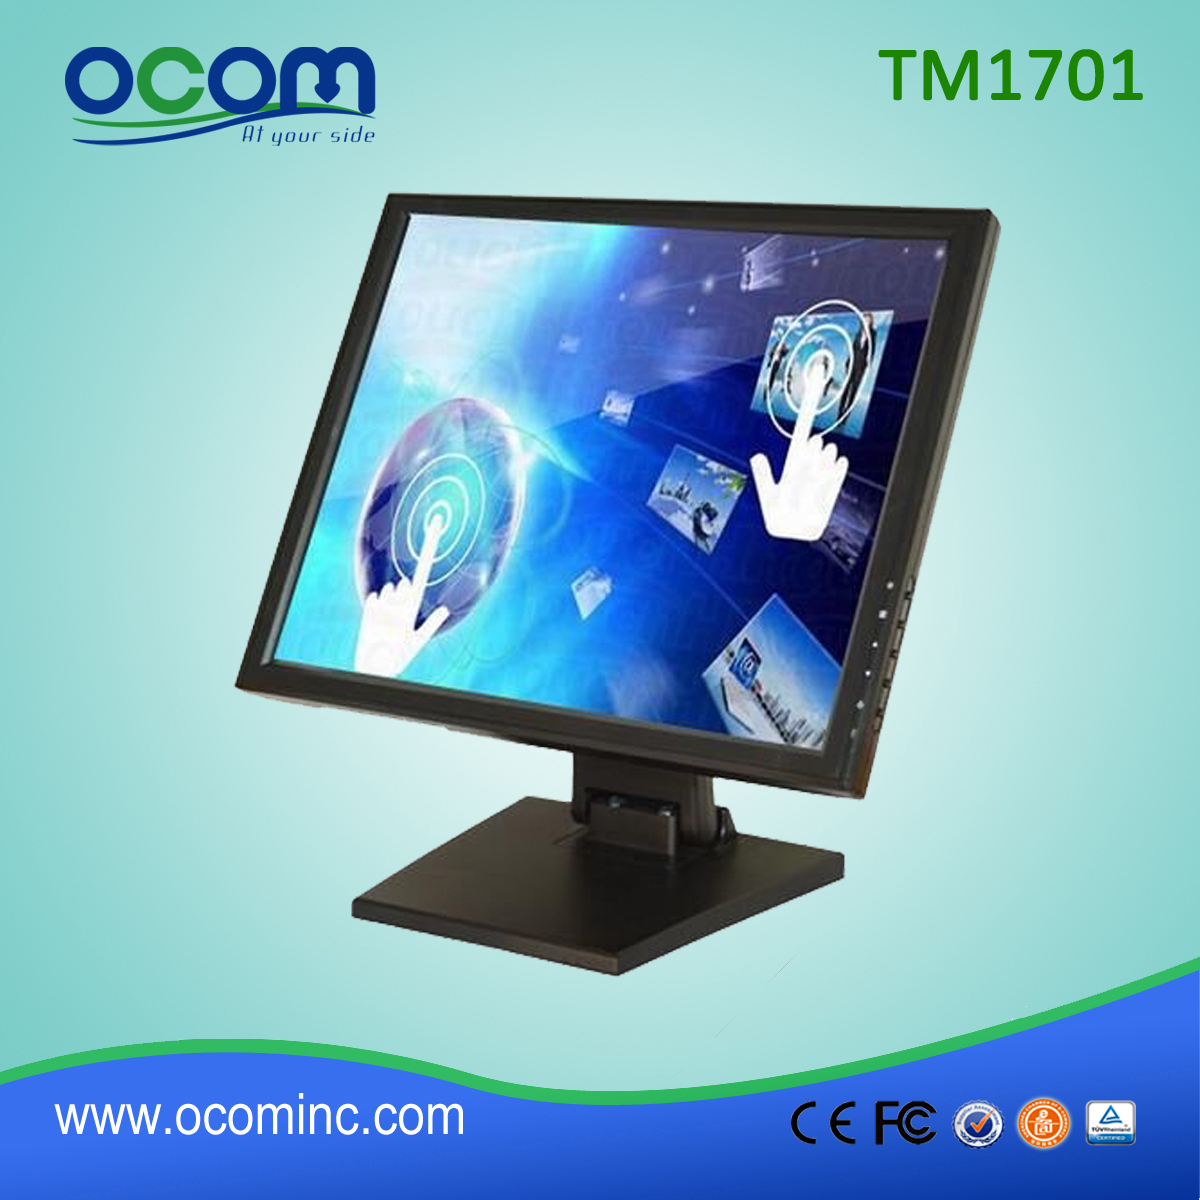 TM1701 17 inch touch screen LCD Display POS Monitor